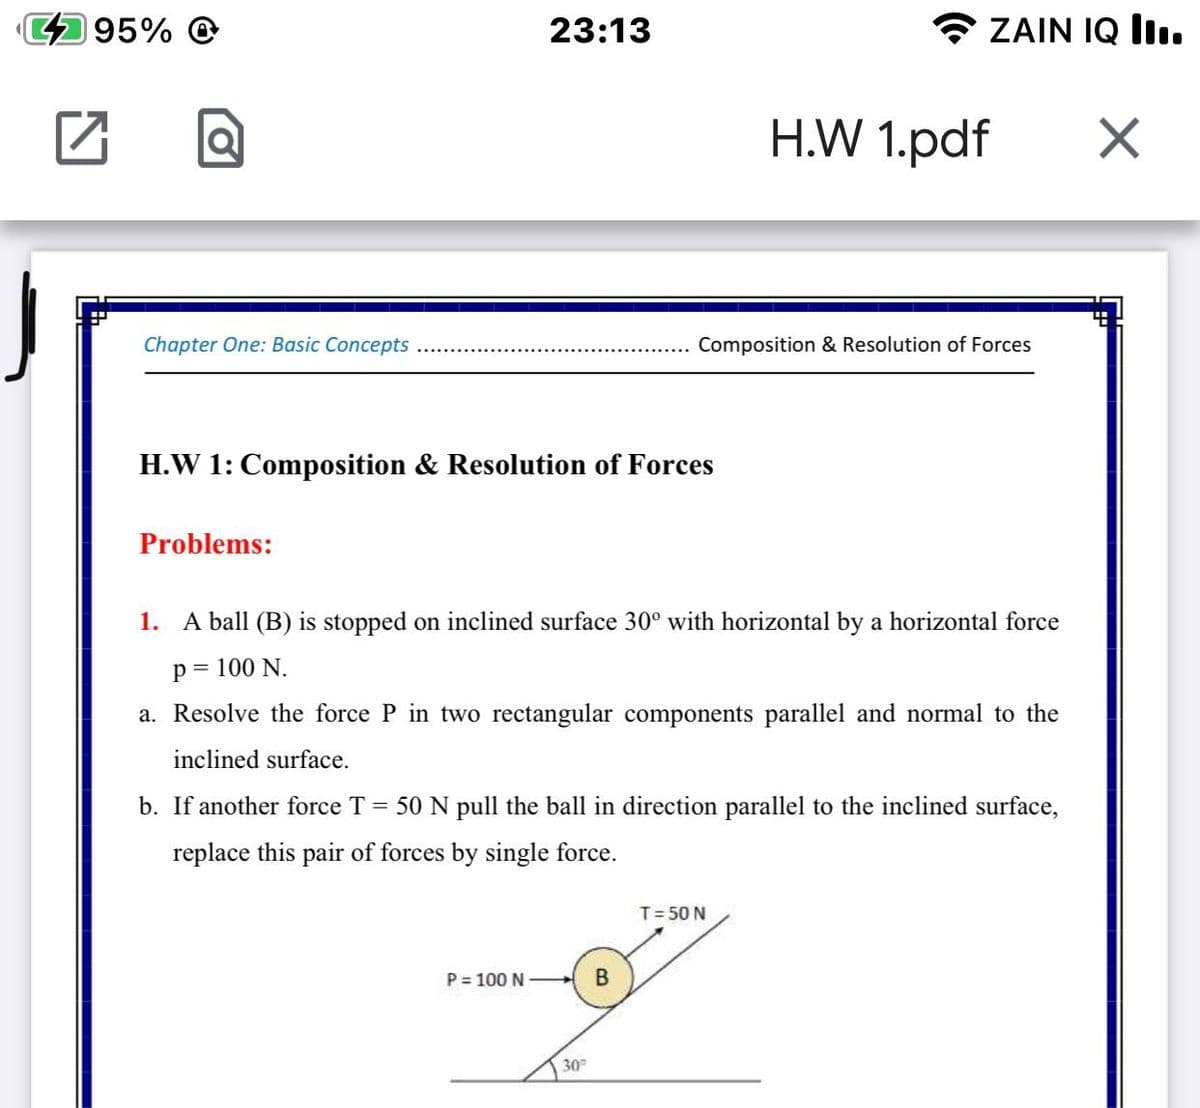 495% @
23:13
ZAIN IQ lI.
H.W 1.pdf
Chapter One: Basic Concepts
Composition & Resolution of Forces
H.W 1: Composition & Resolution of Forces
Problems:
1. A ball (B) is stopped on inclined surface 30° with horizontal by a horizontal force
p = 100 N.
a. Resolve the force P in two rectangular components parallel and normal to the
inclined surface.
b. If another force T = 50 N pull the ball in direction parallel to the inclined surface,
replace this pair of forces by single force.
T= 50 N
P = 100 N
30
